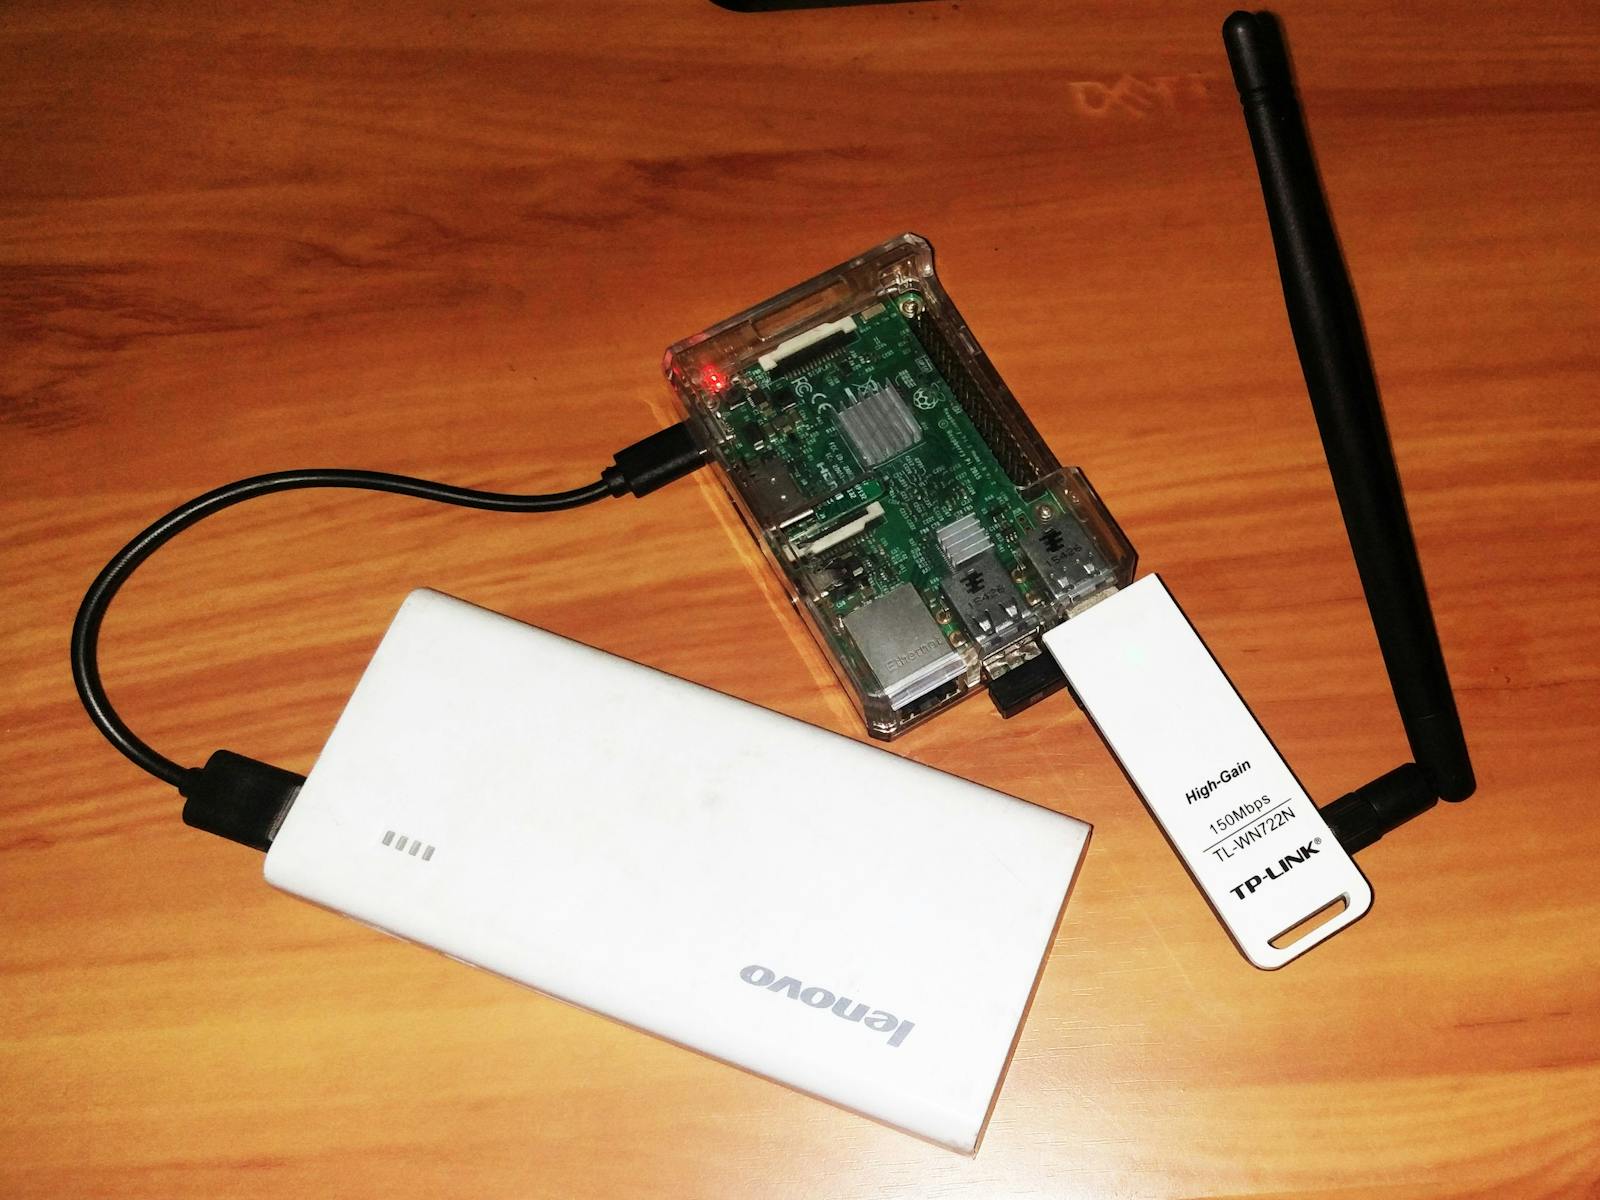 Is Raspberry Pi Used For Hacking